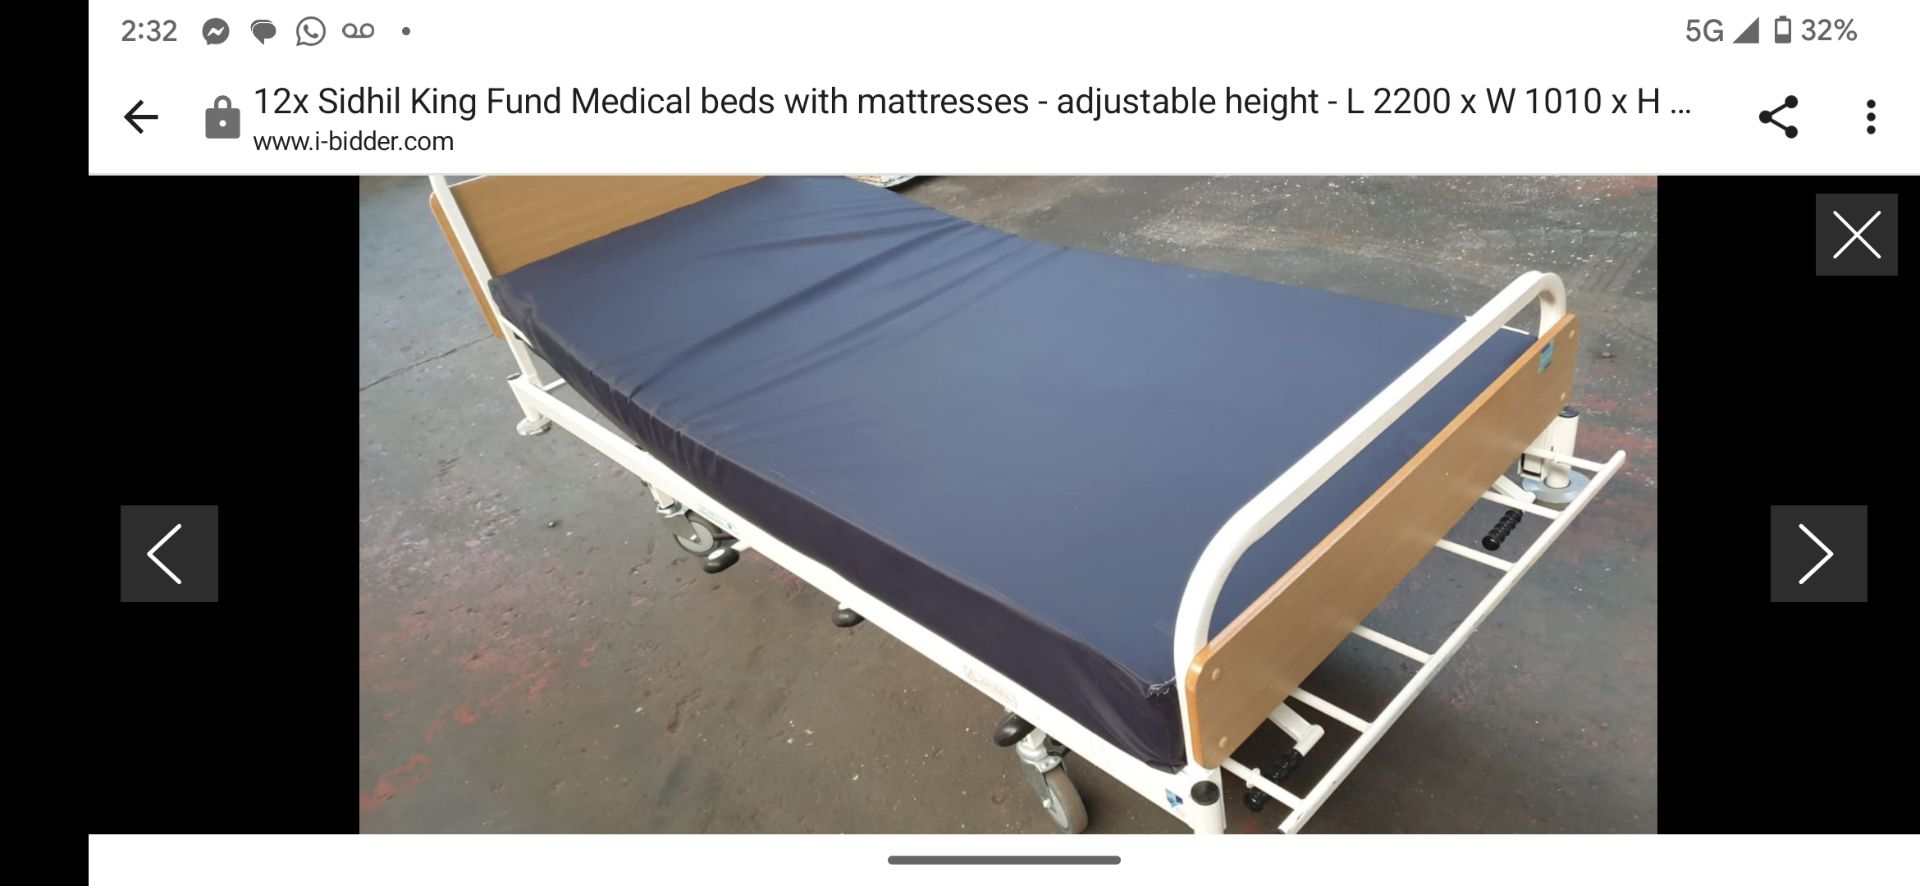 1 x Sidhil Kings Fund Hydraulic Hospital Bed With Mattress - Image 2 of 7